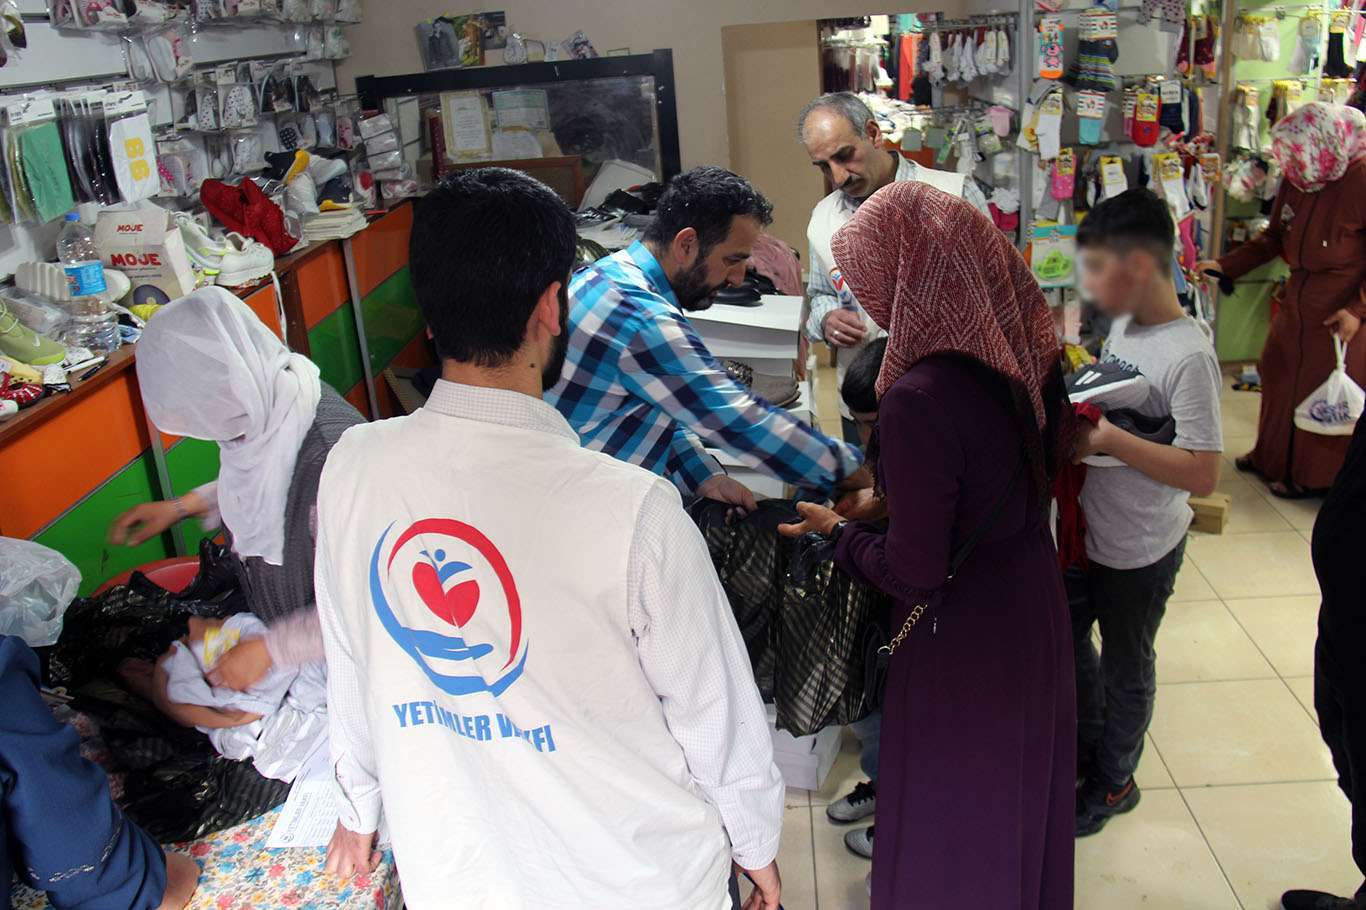 Orphans Foundation provides clothing aid to hundreds of orphans in southeastern Turkey